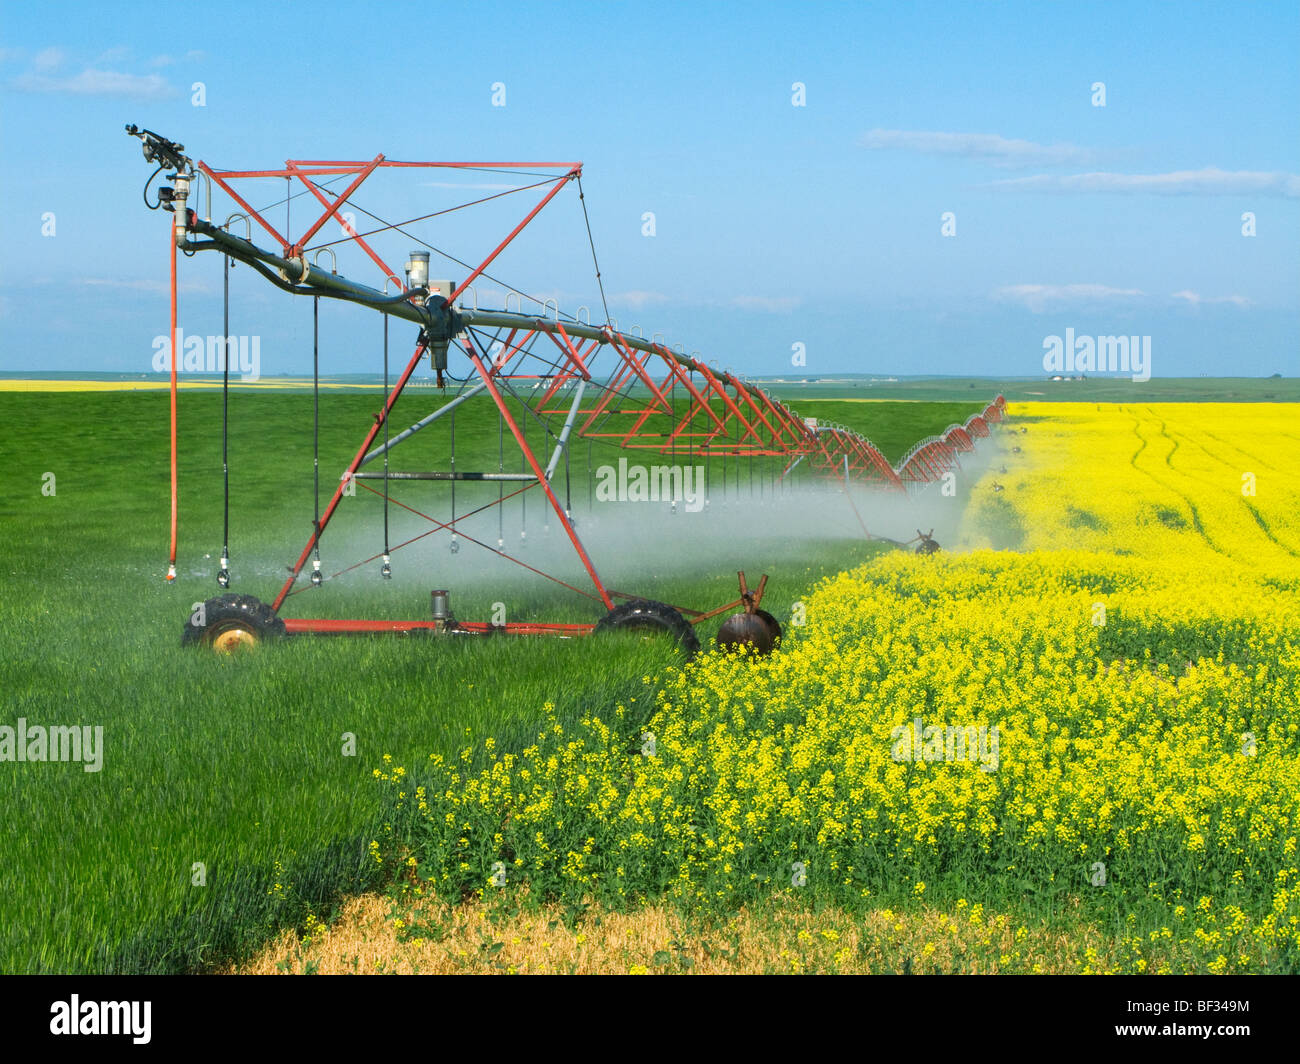 A center pivot irrigation system crossing from a blooming canola field to an adjoining cereal grain field / Alberta, Canada. Stock Photo